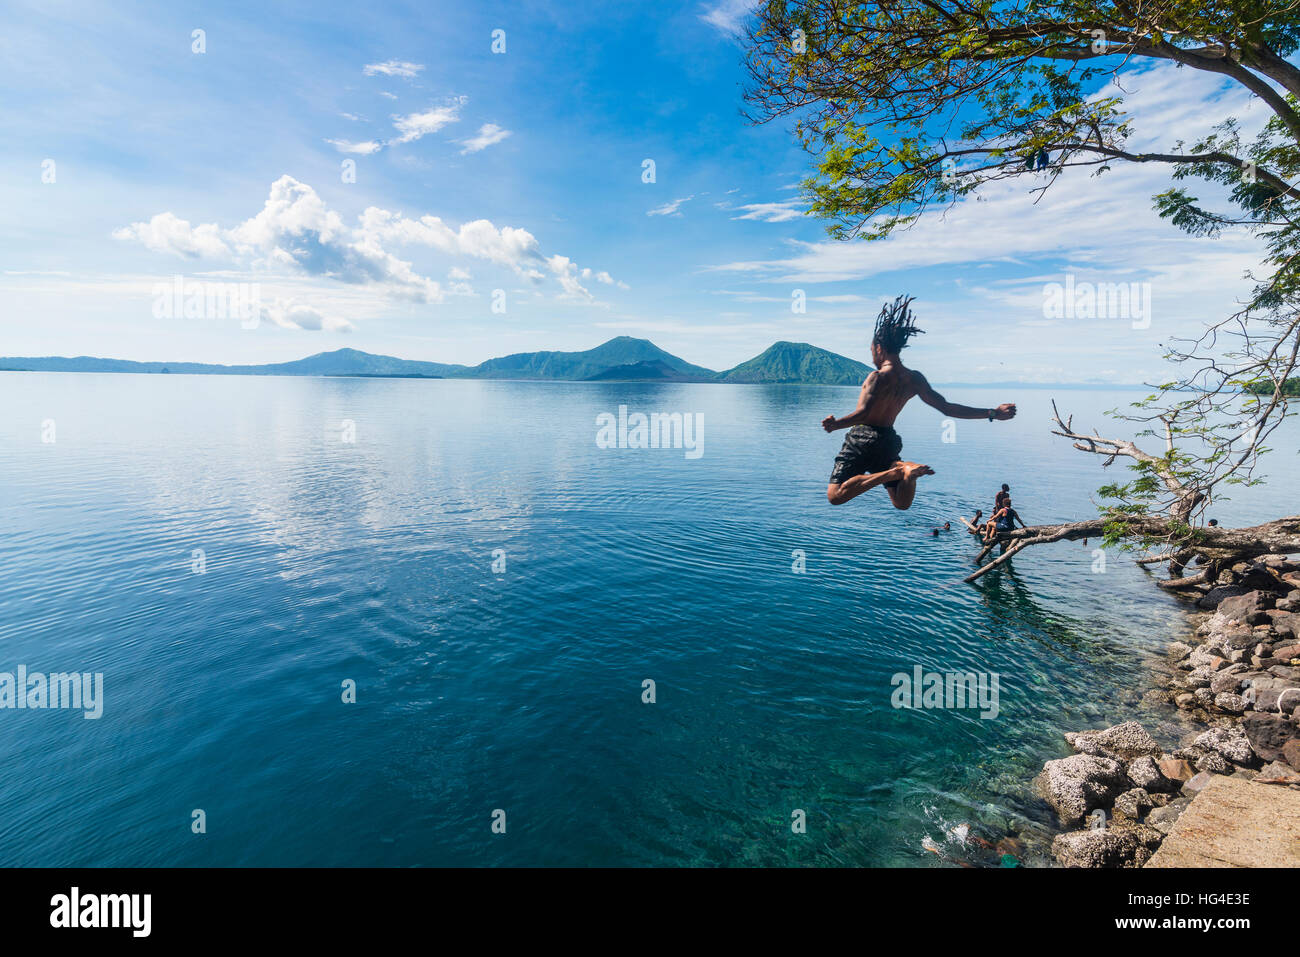 Man jumping in the bay of Rabaul with Volcano Tavurvur in the background, East New Britain, Papua New Guinea, Pacific Stock Photo